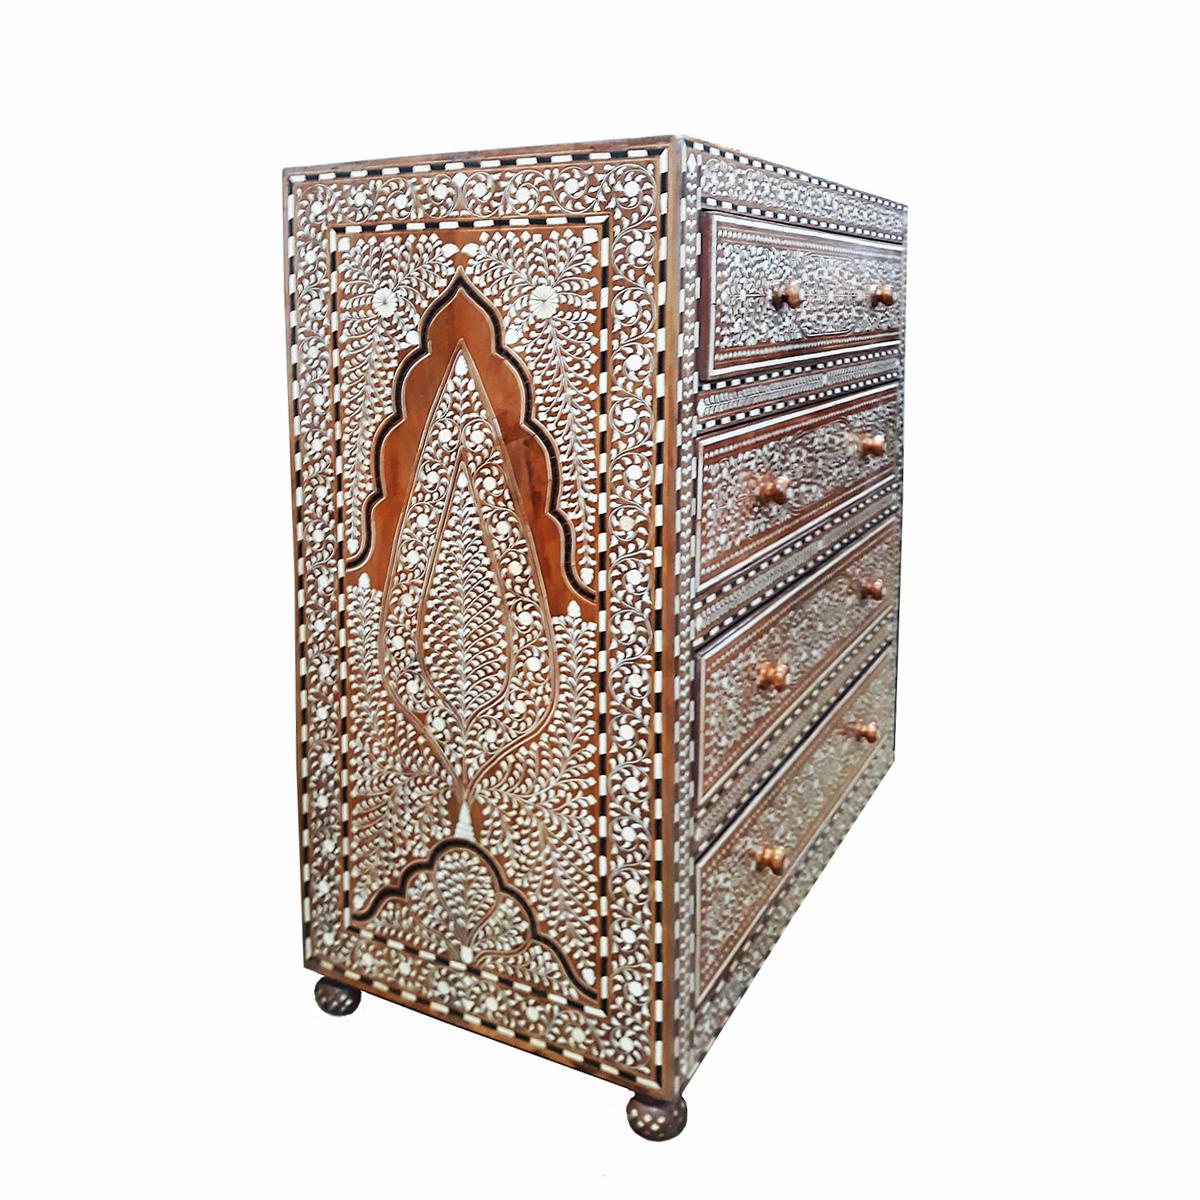 A charming 5-drawer chest, handcrafted in India out of aged teak wood and cruelty-free sourced animal bone inlays. 

Inlay is ancient decorative technique that involves embedding delicate, hand-carved pieces of bone (initially it was ivory) into